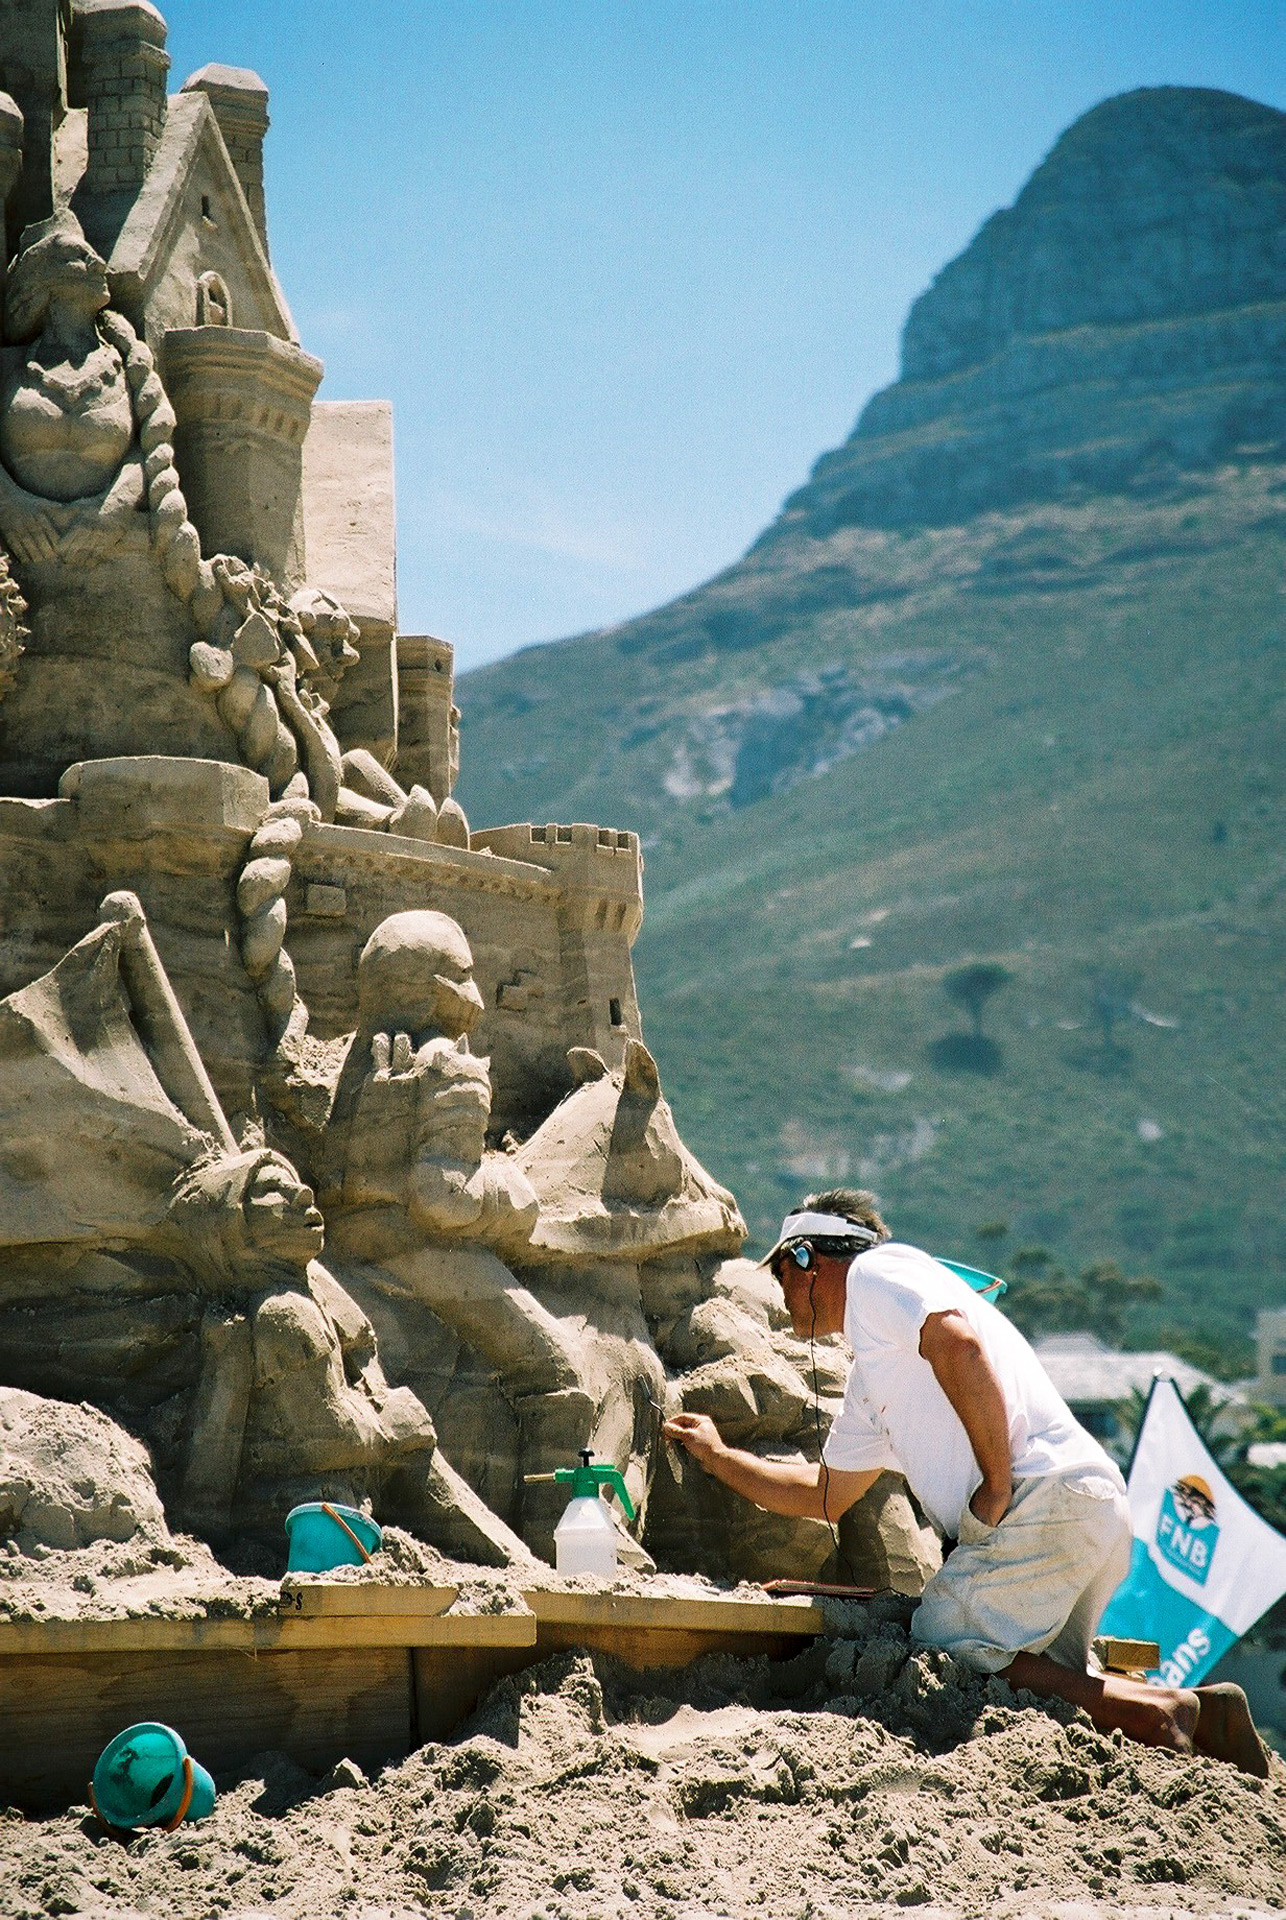 Artists Sculpting Giant Pile of Sand Into Largest Sandcastle